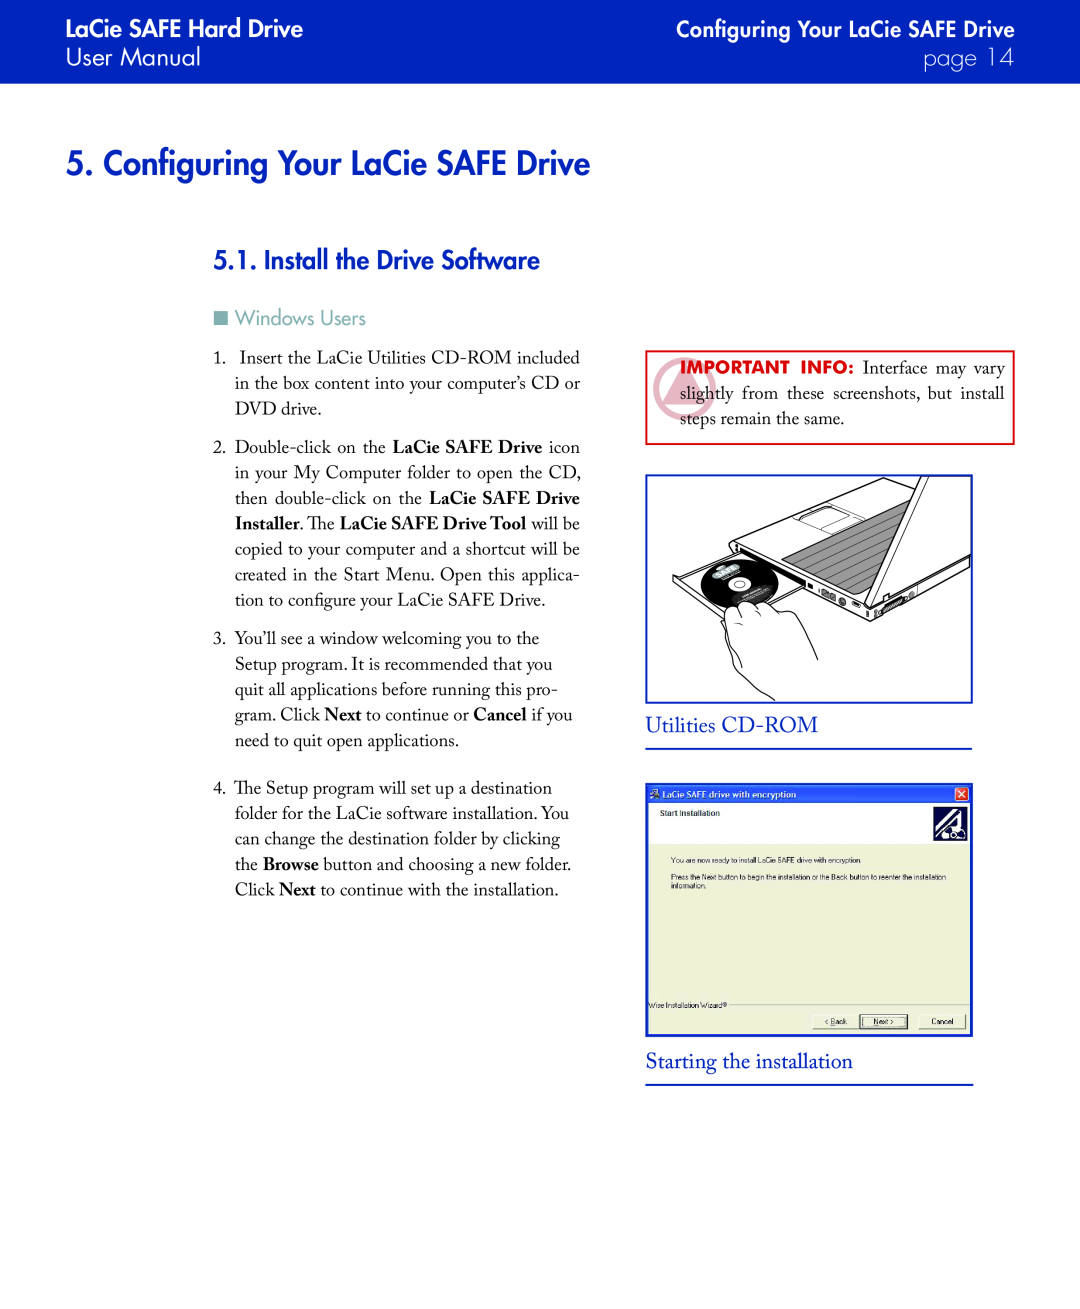 LaCie Configuring Your LaCie SAFE Drive, Install the Drive Software, Utilities CD-ROM, Starting the installation, page 